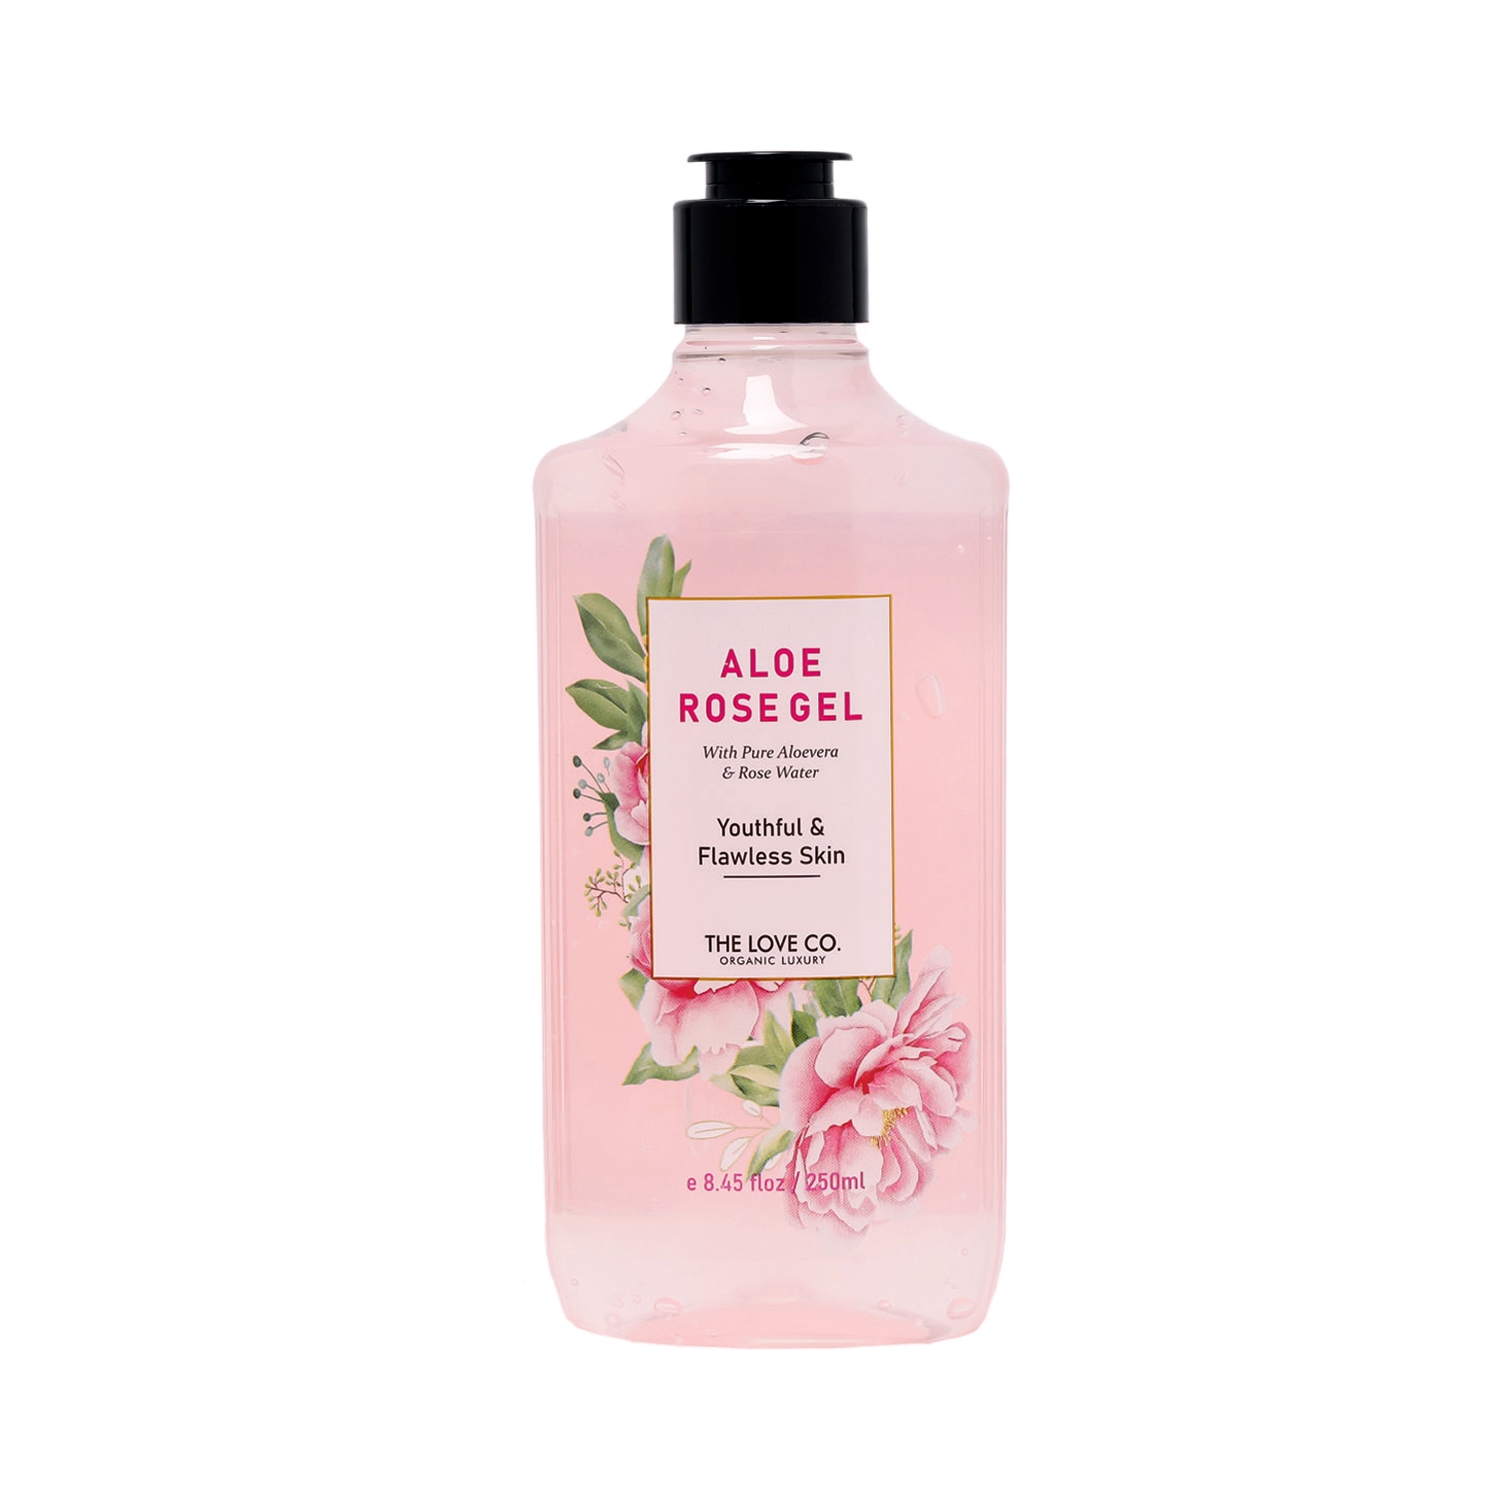 THE LOVE CO. | THE LOVE CO. Aloe Rose Gel For Youthful & Flawless Skin (250ml)